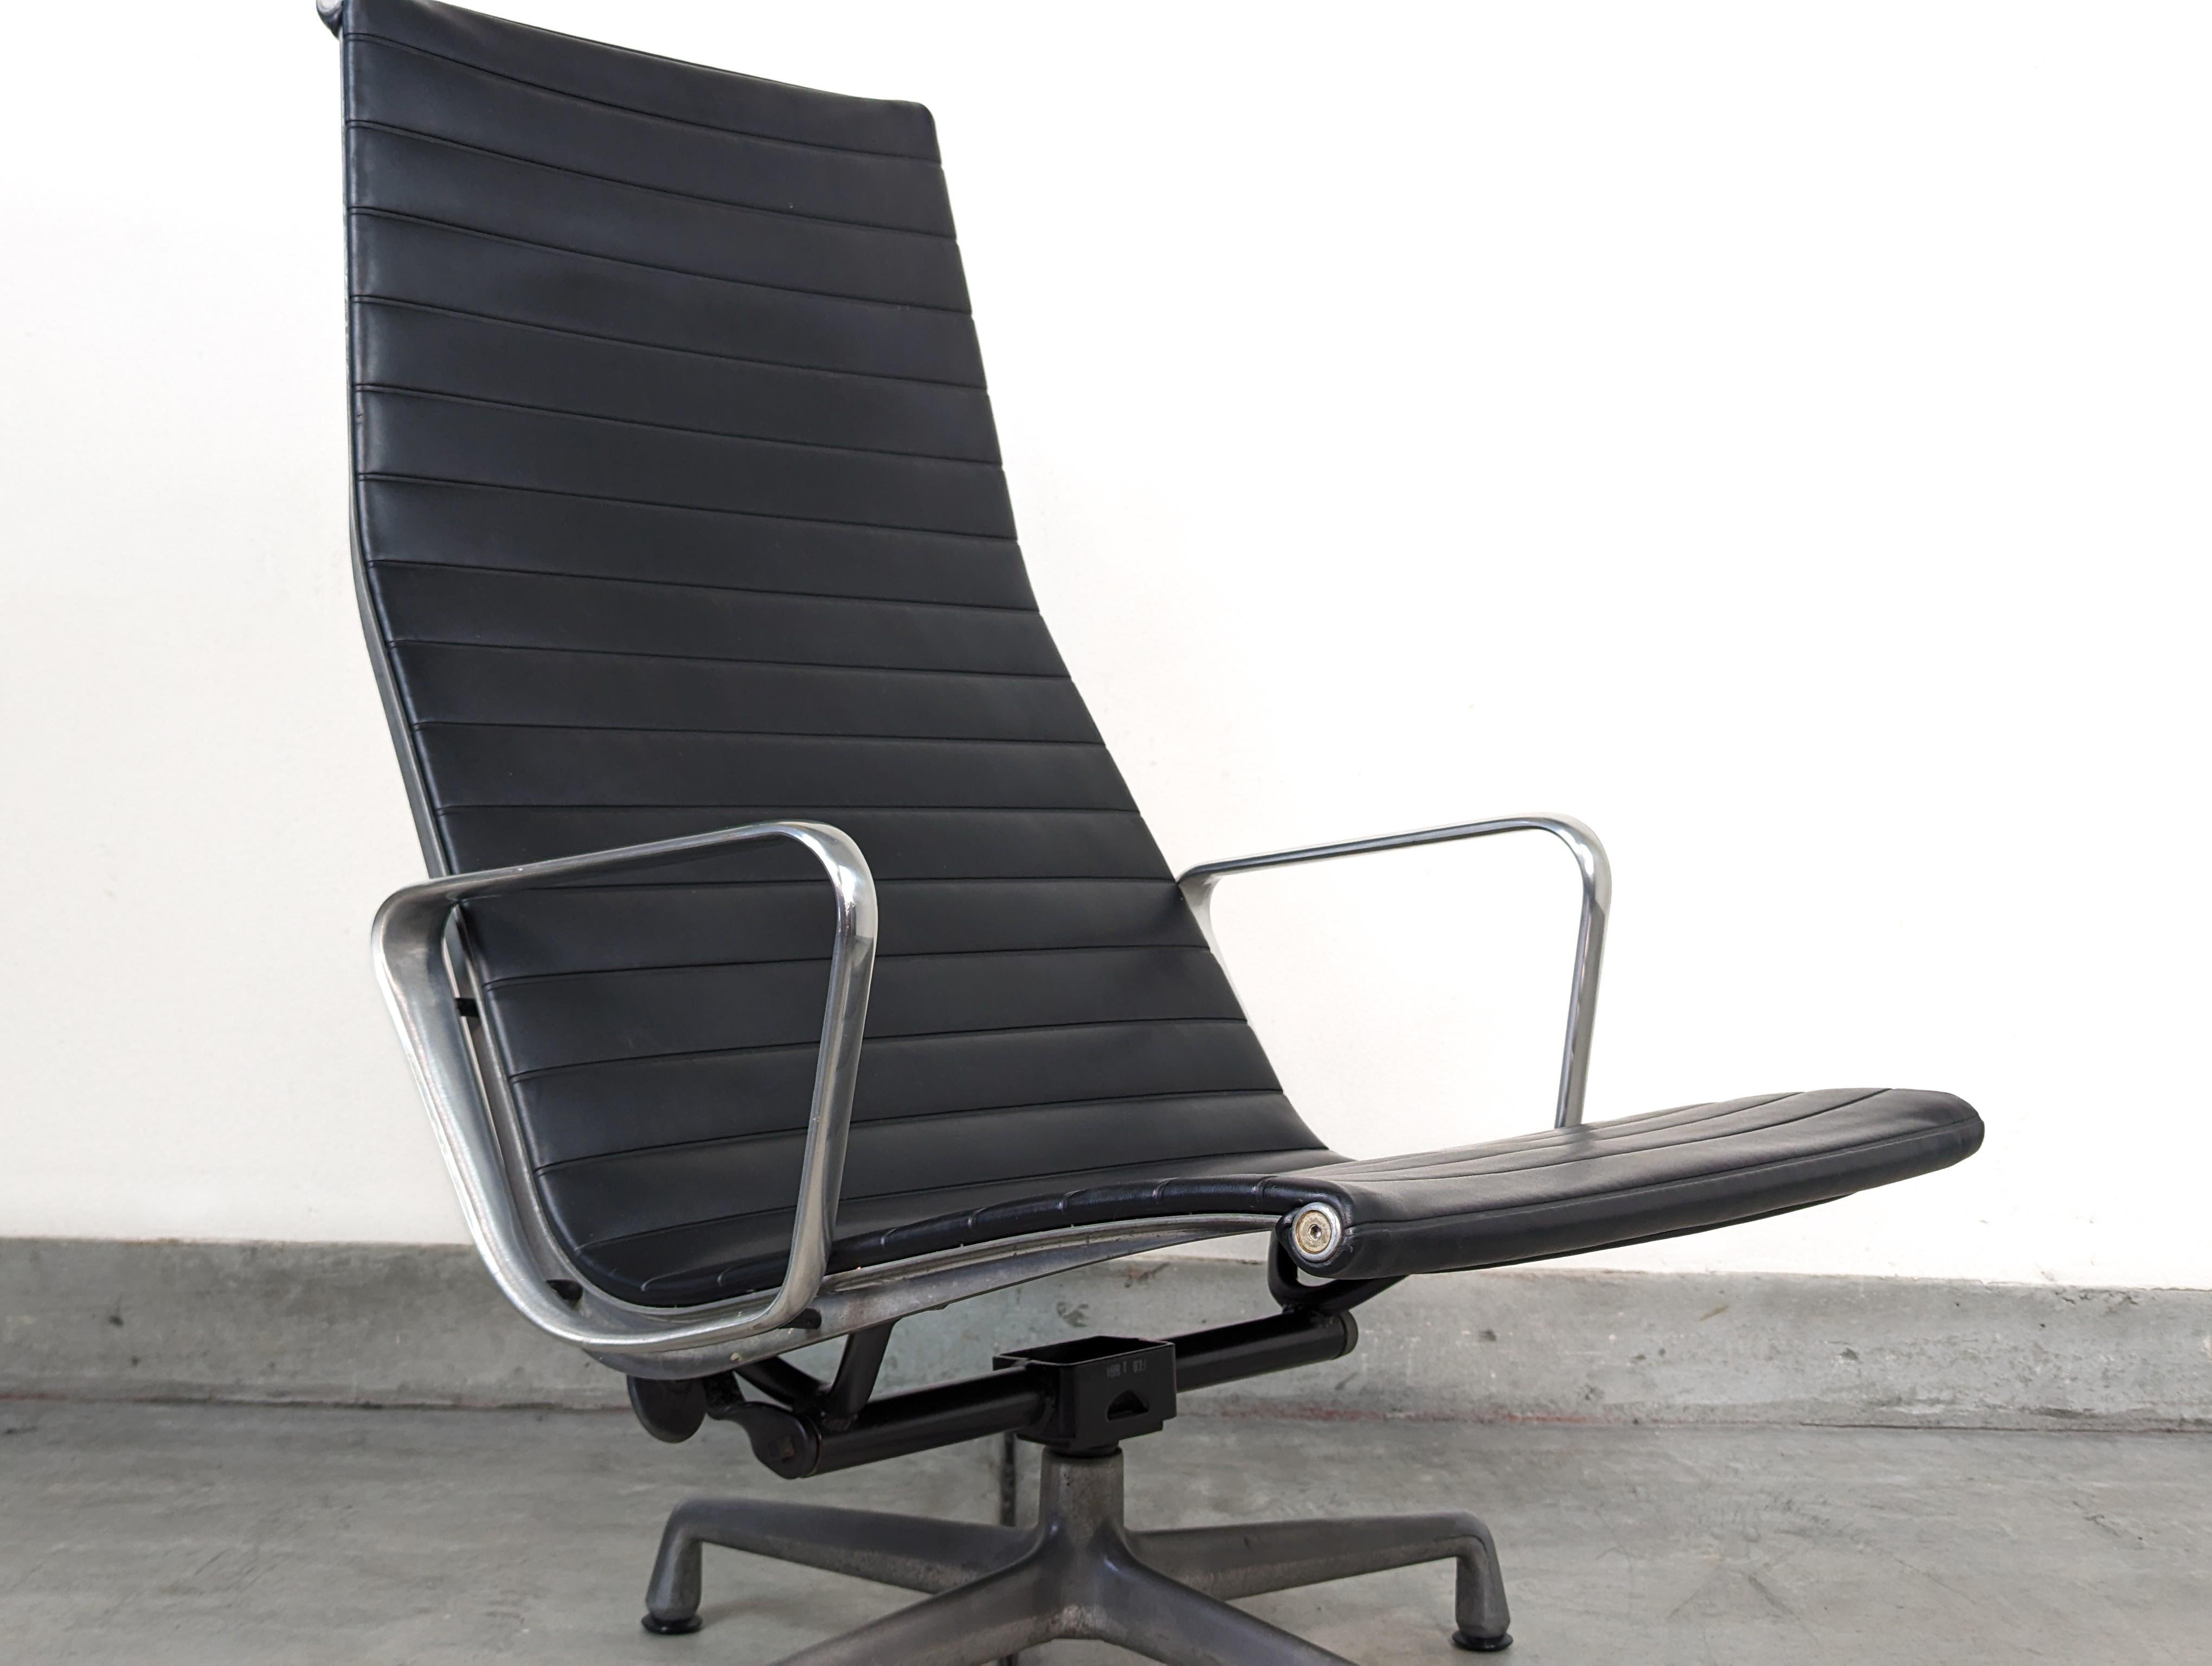 Eames Aluminum Group Lounge Office Chair by Herman Miller, c1990s For Sale 4